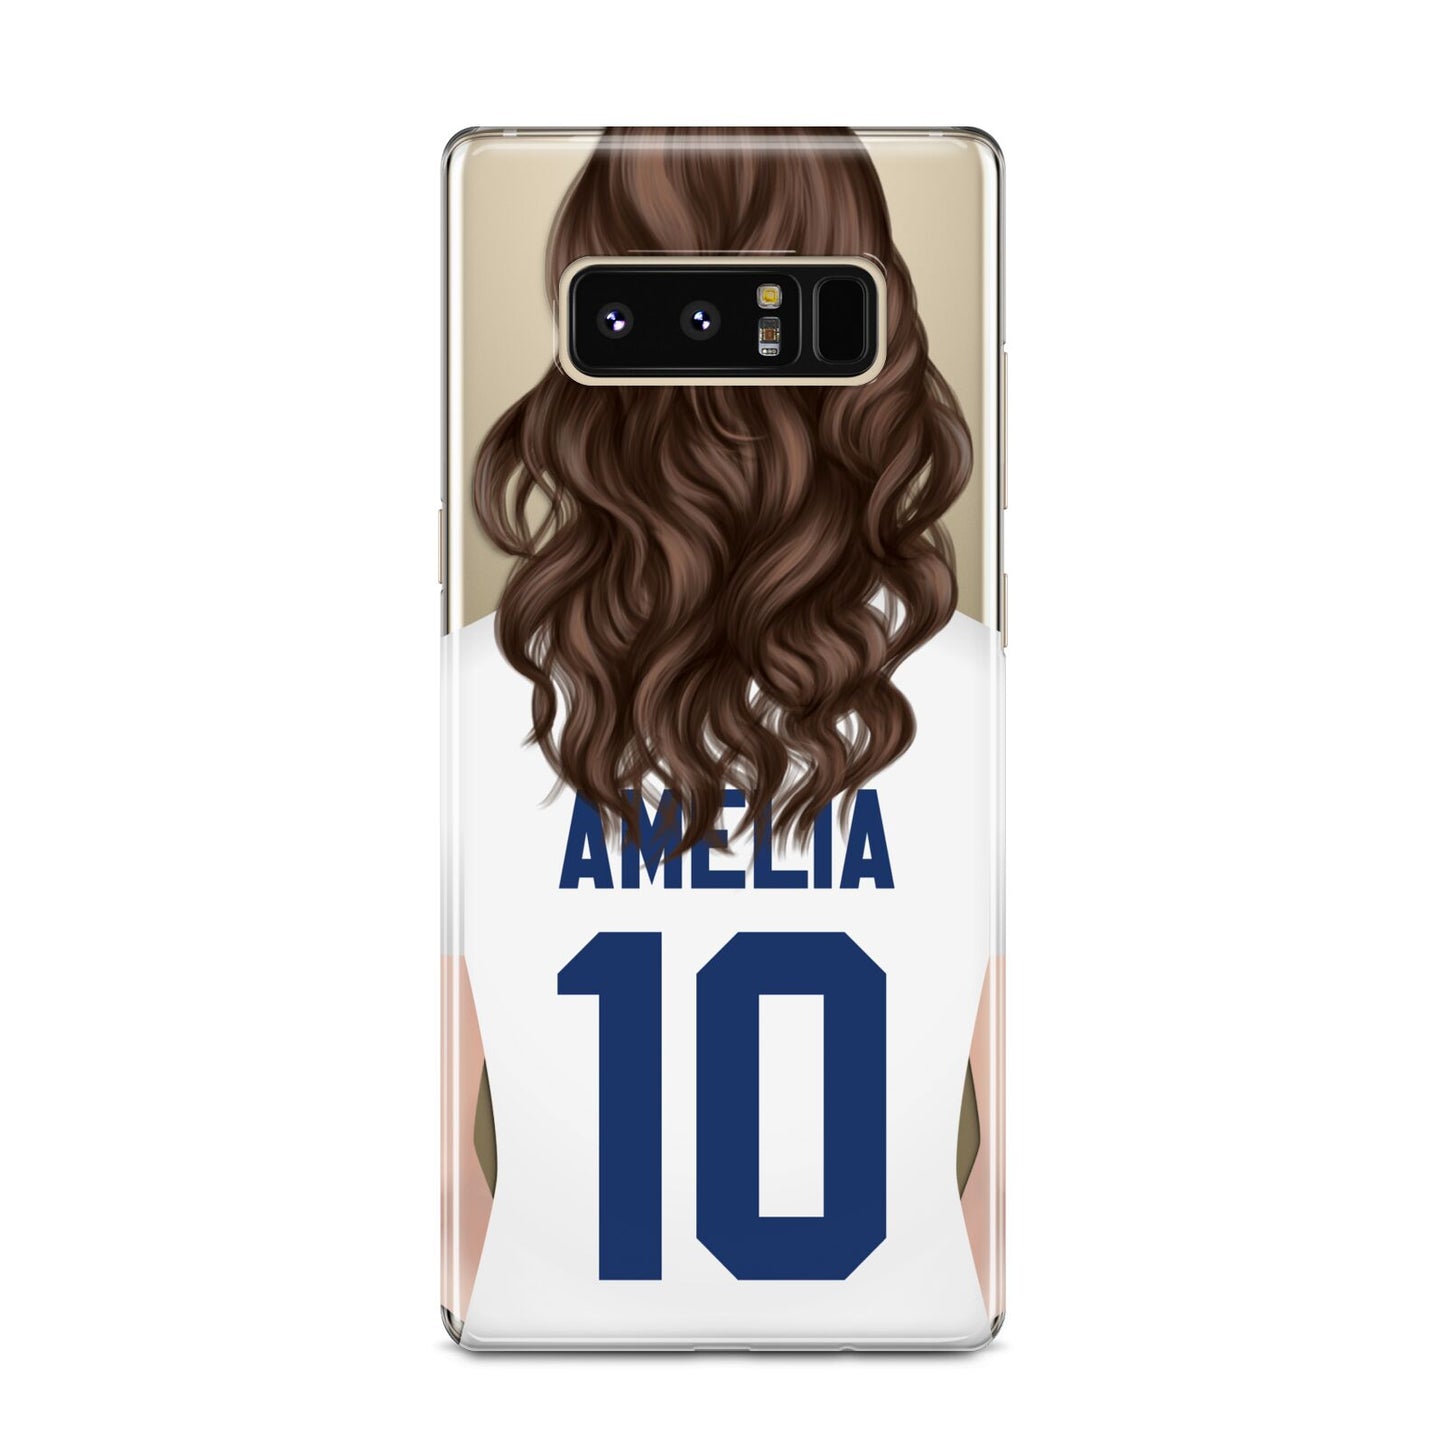 Womens Footballer Personalised Samsung Galaxy Note 8 Case